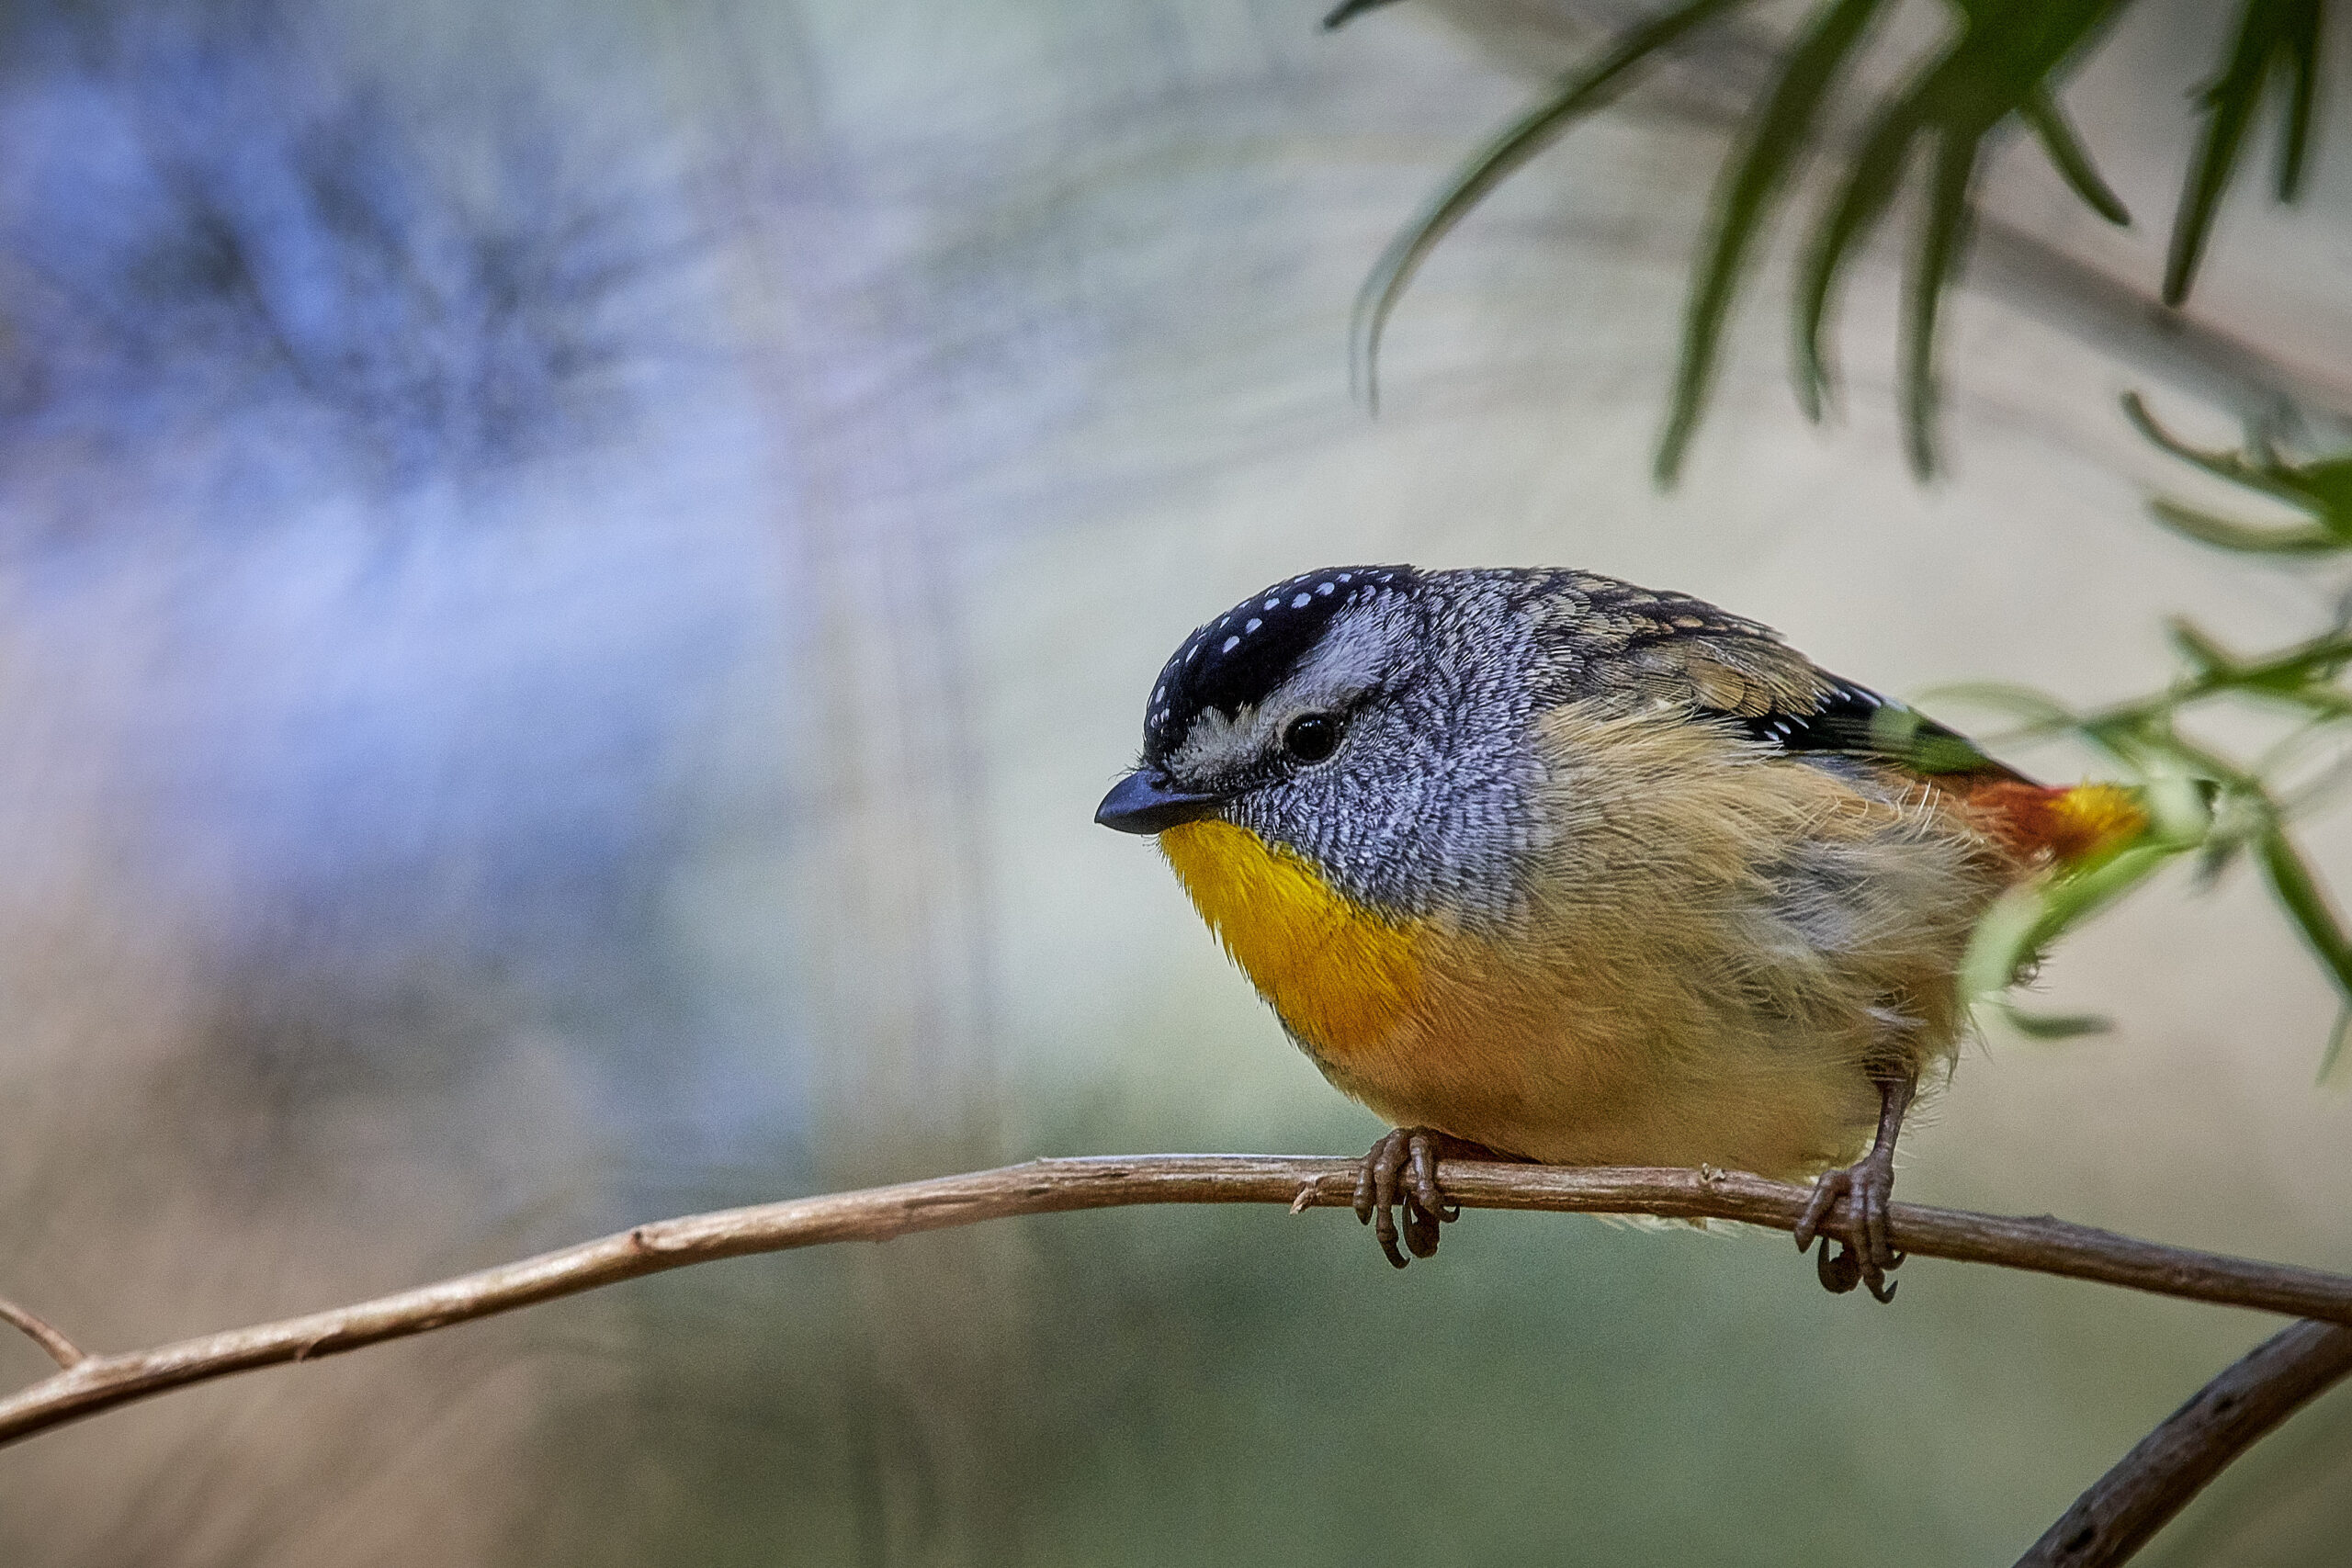 Observing the Spotted Pardalote